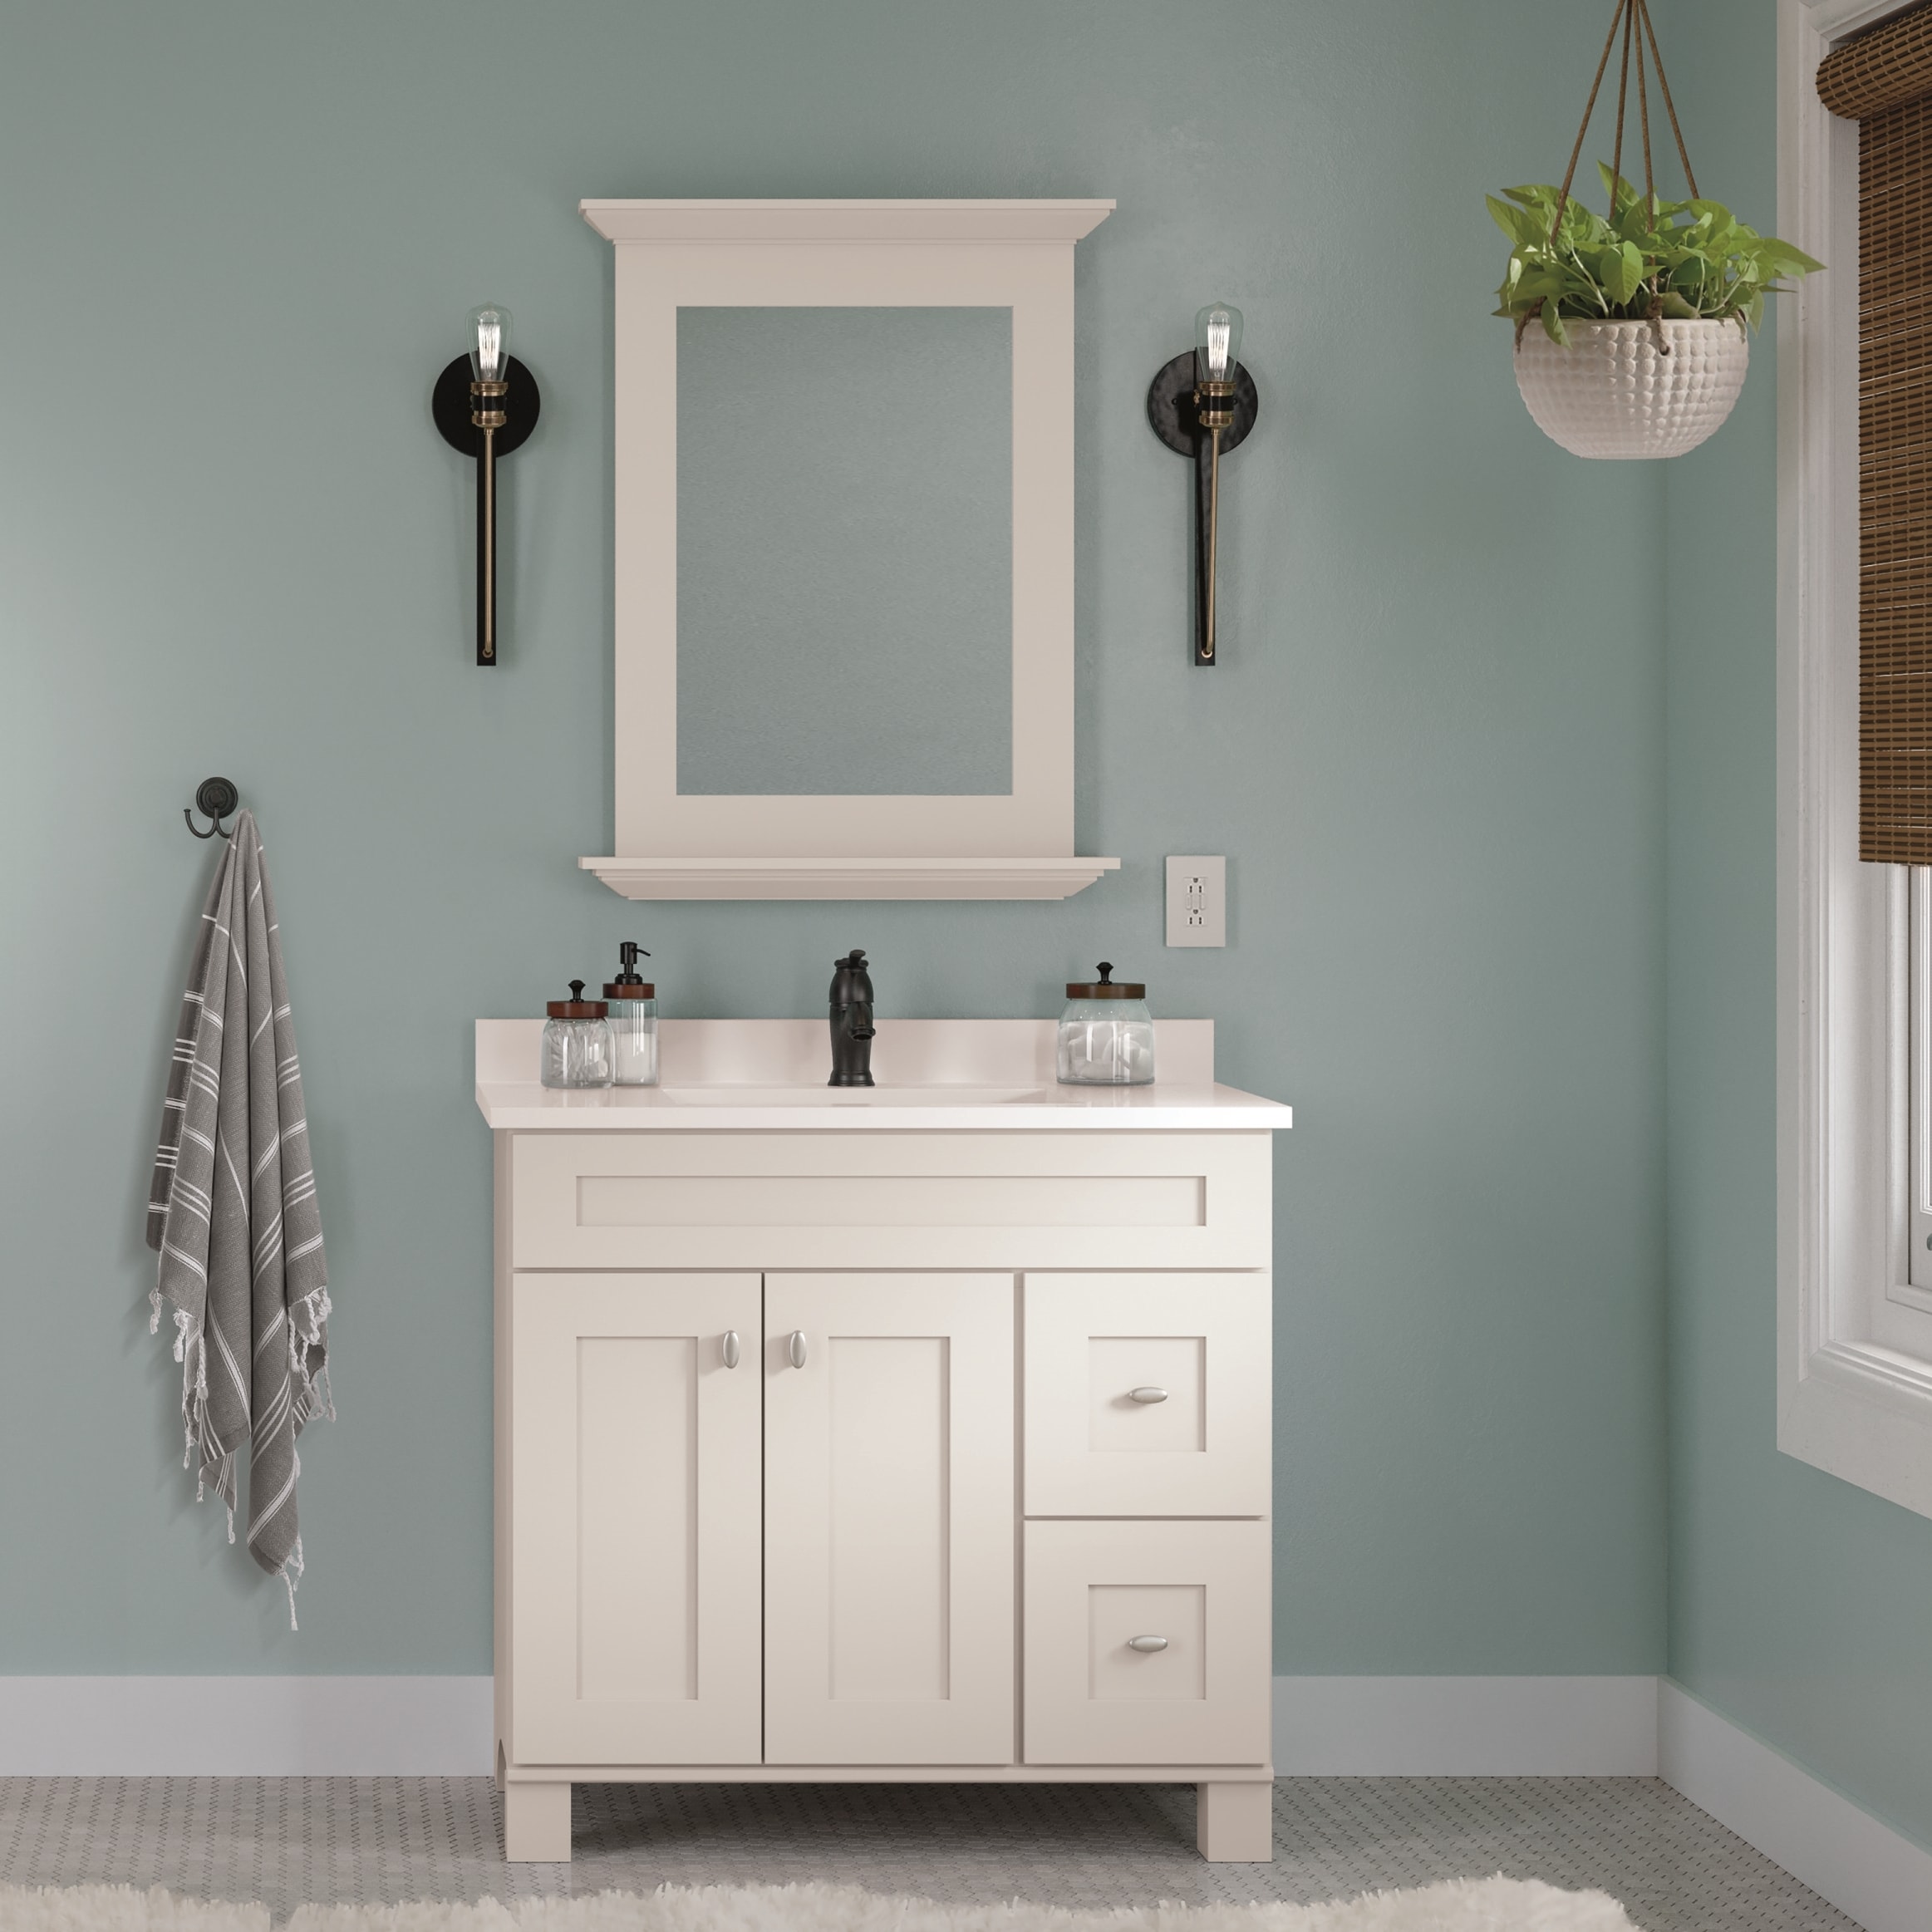 Vanity Mirror Cabinet with Side Pull-outs - Diamond